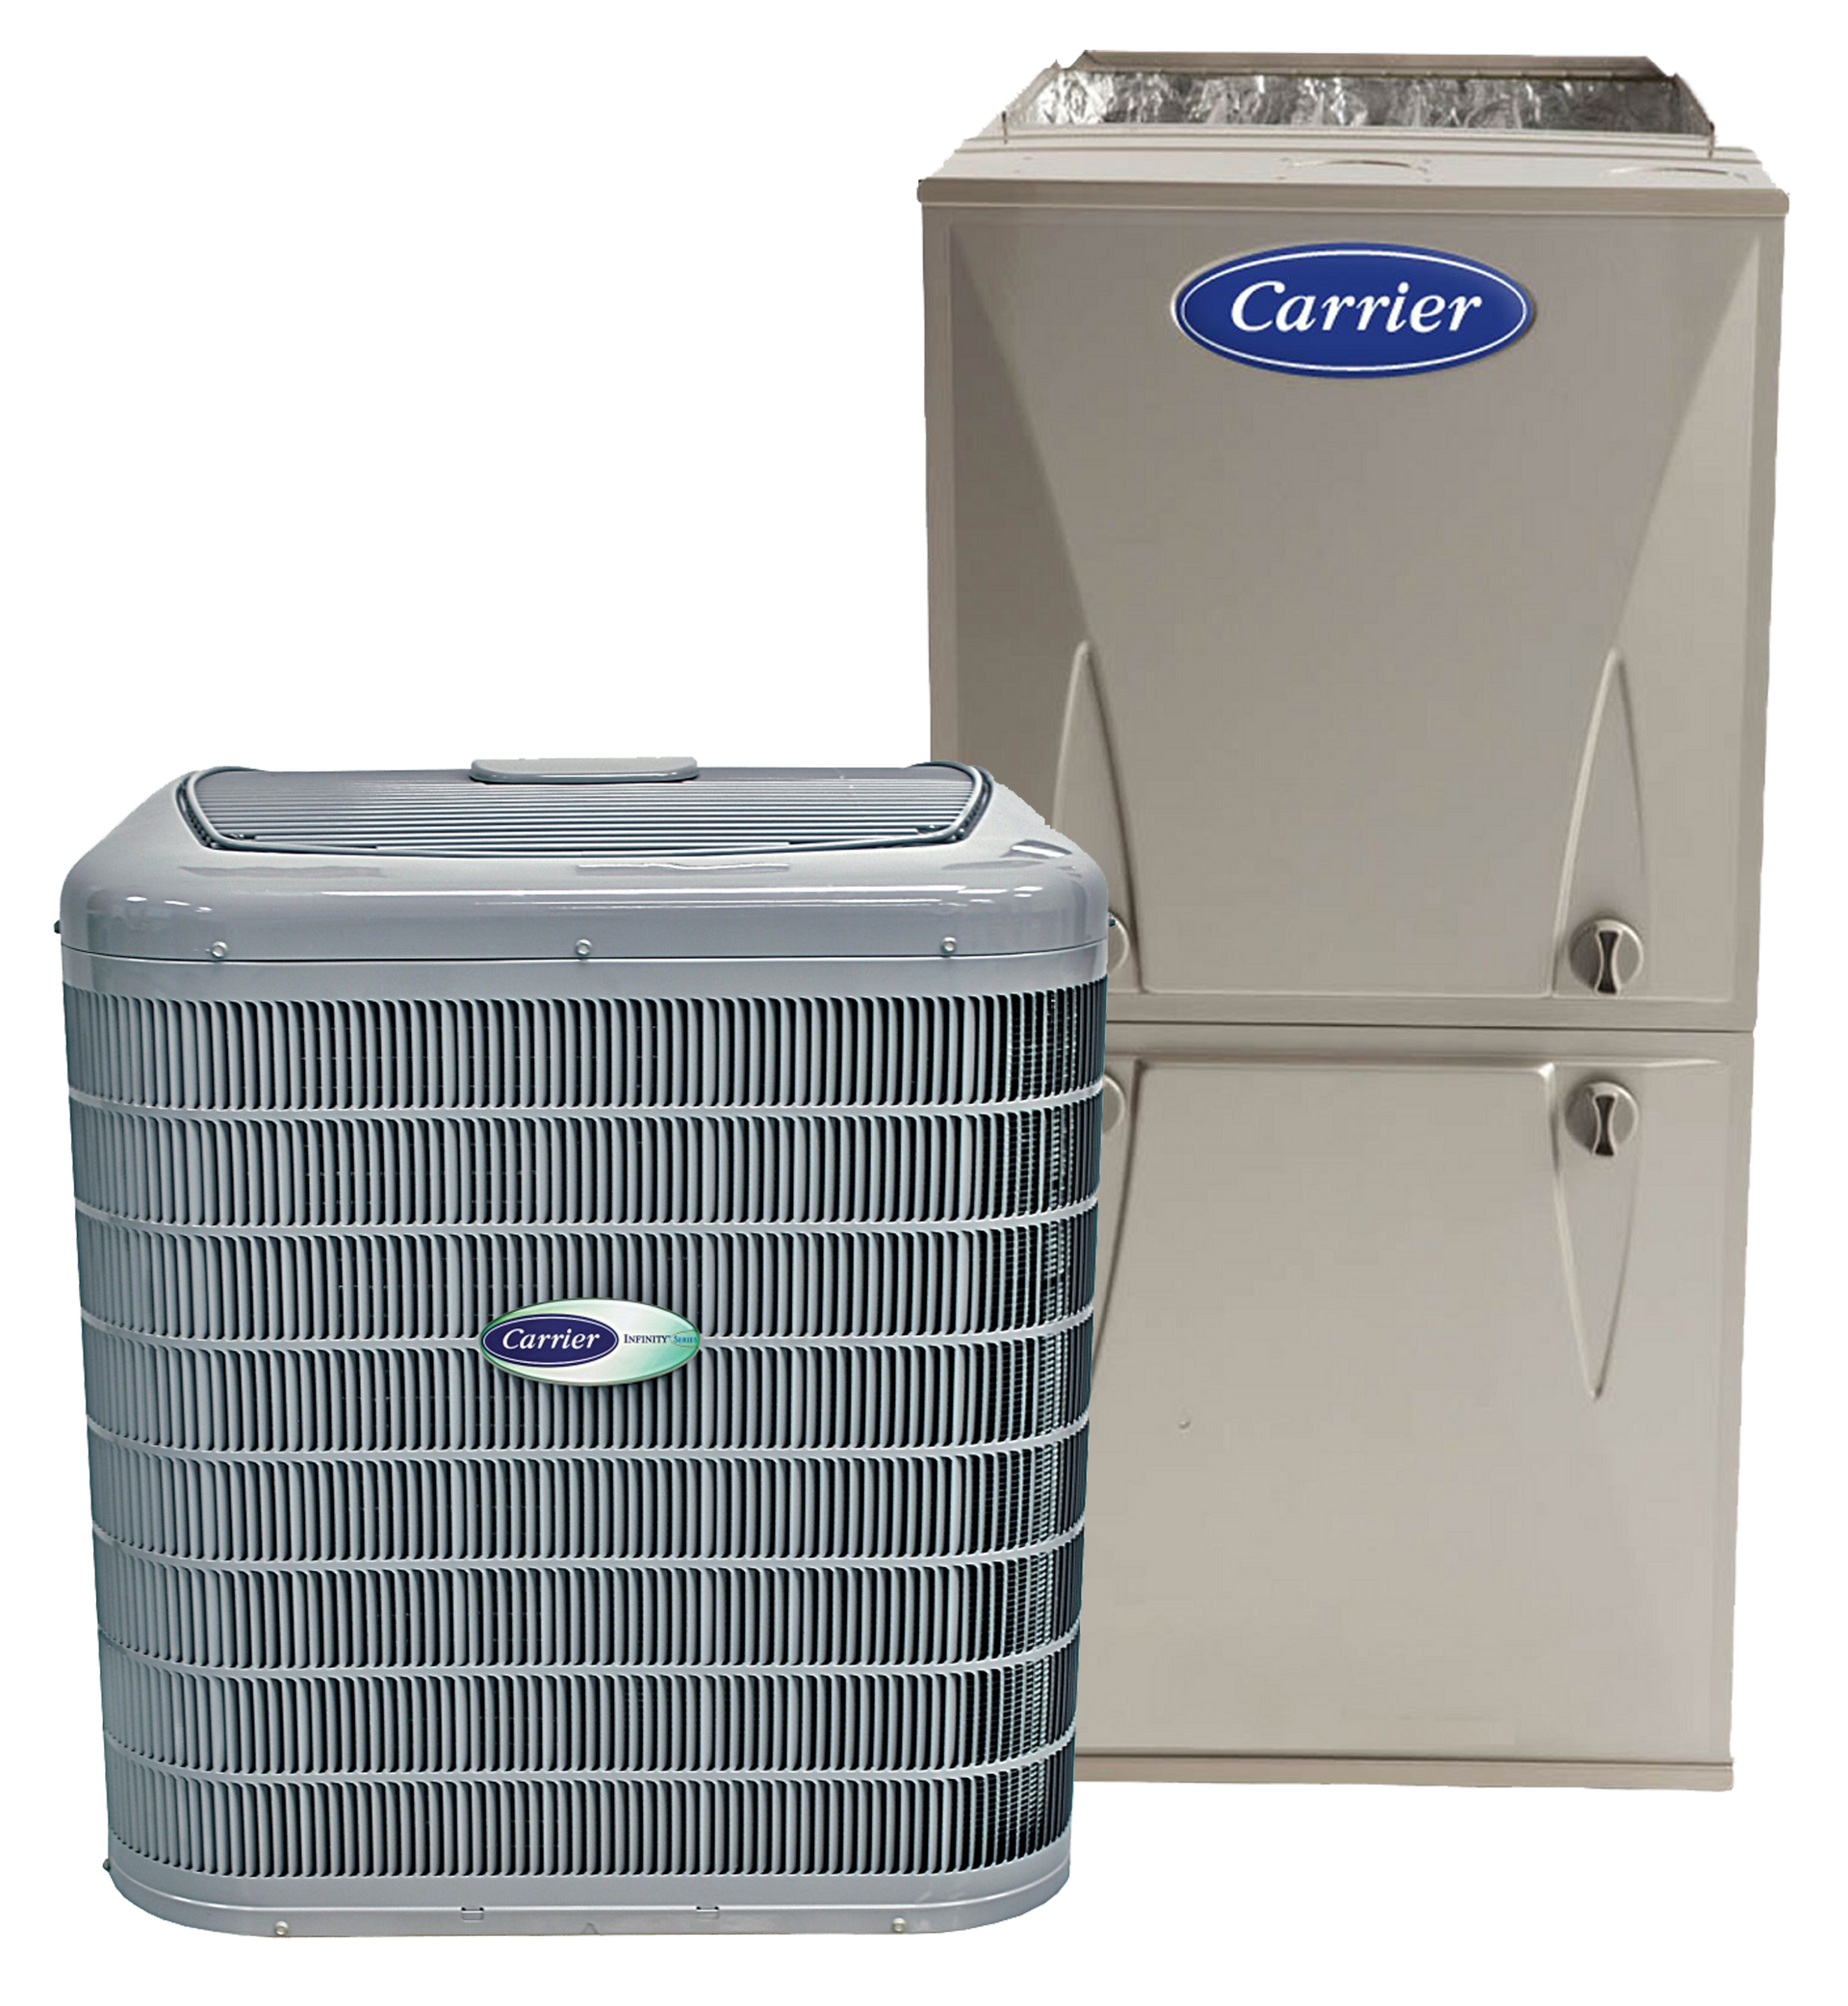 a carrier air conditioner is sitting next to a carrier air conditioner .